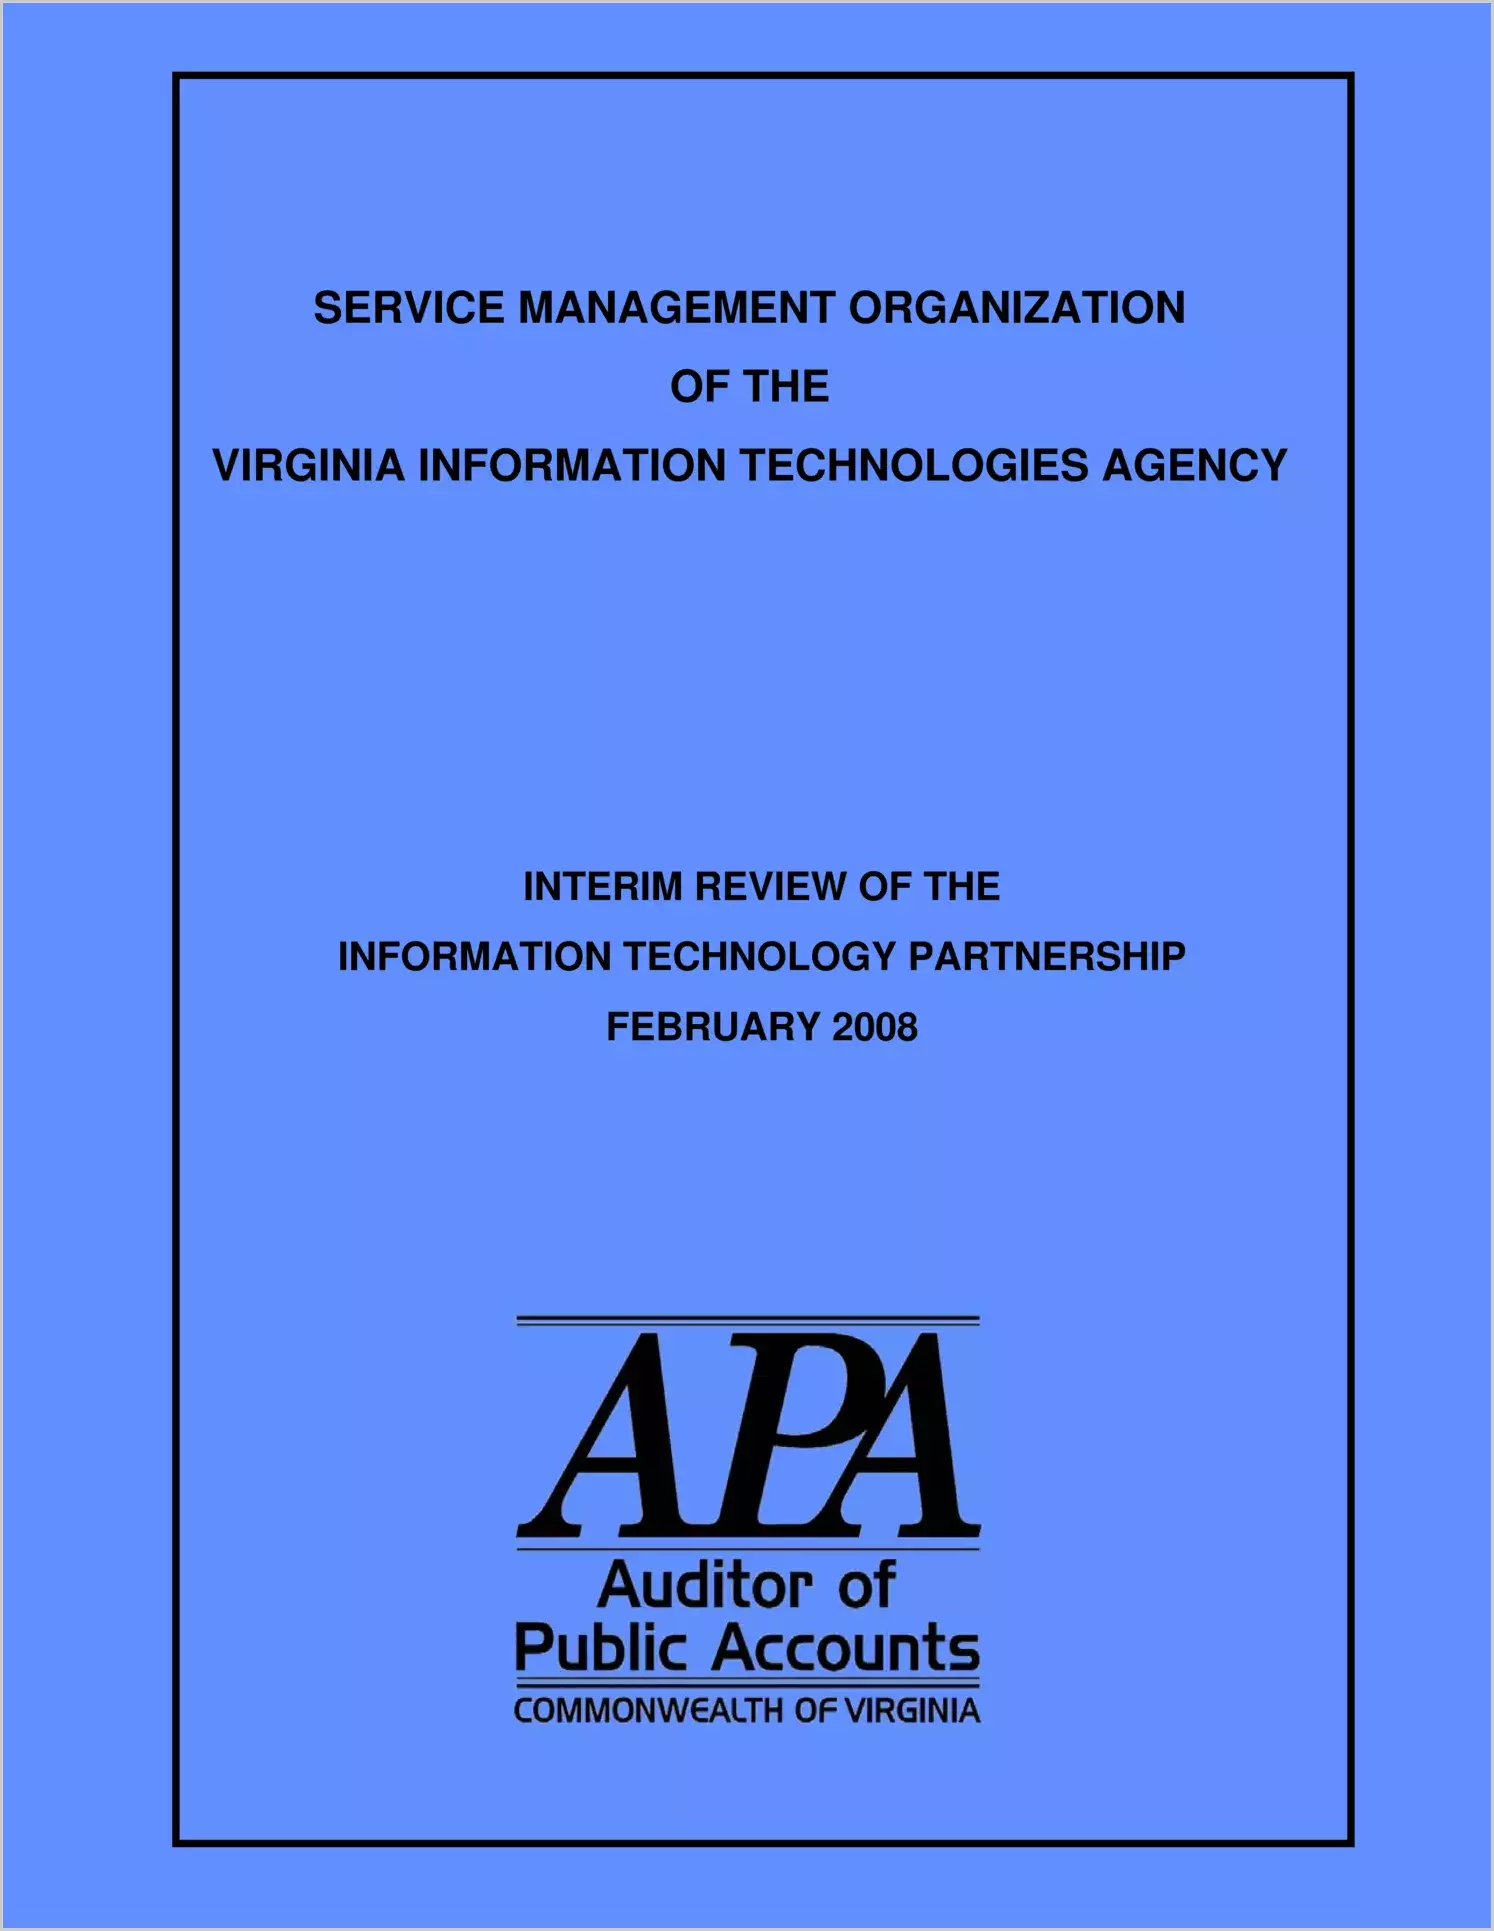 Service Management Organization of the Virginia Information Technologies Agency Interim Review of the Information Technology Partnership February 2008